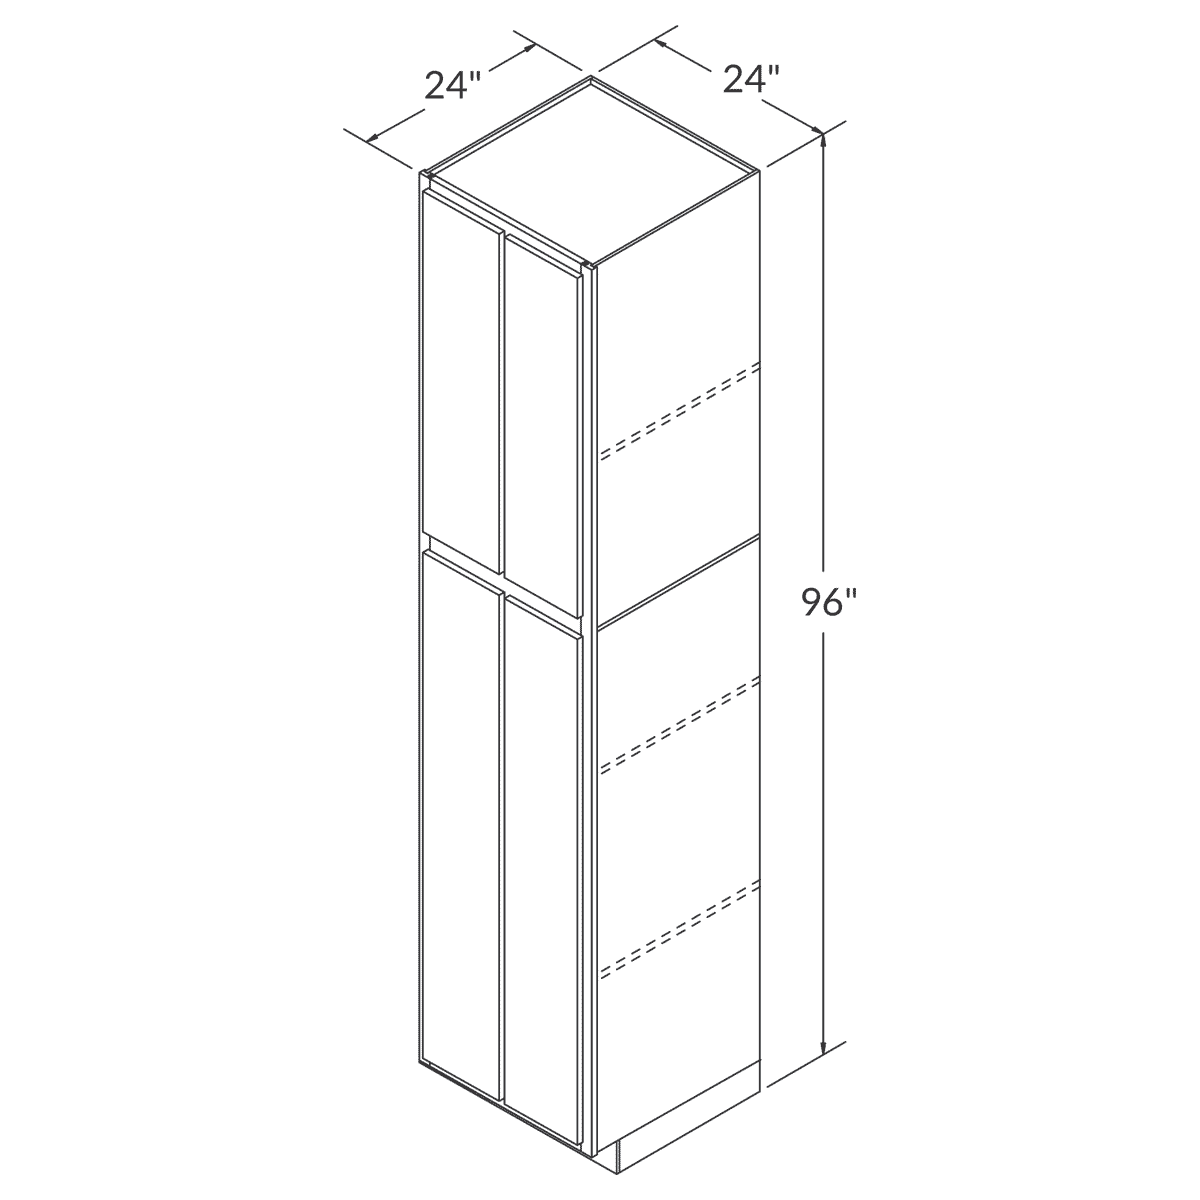 Cubitac Prestige Dover Shale Tall Pantry 24"W x 96"H Assembled Cabinet Wireframe